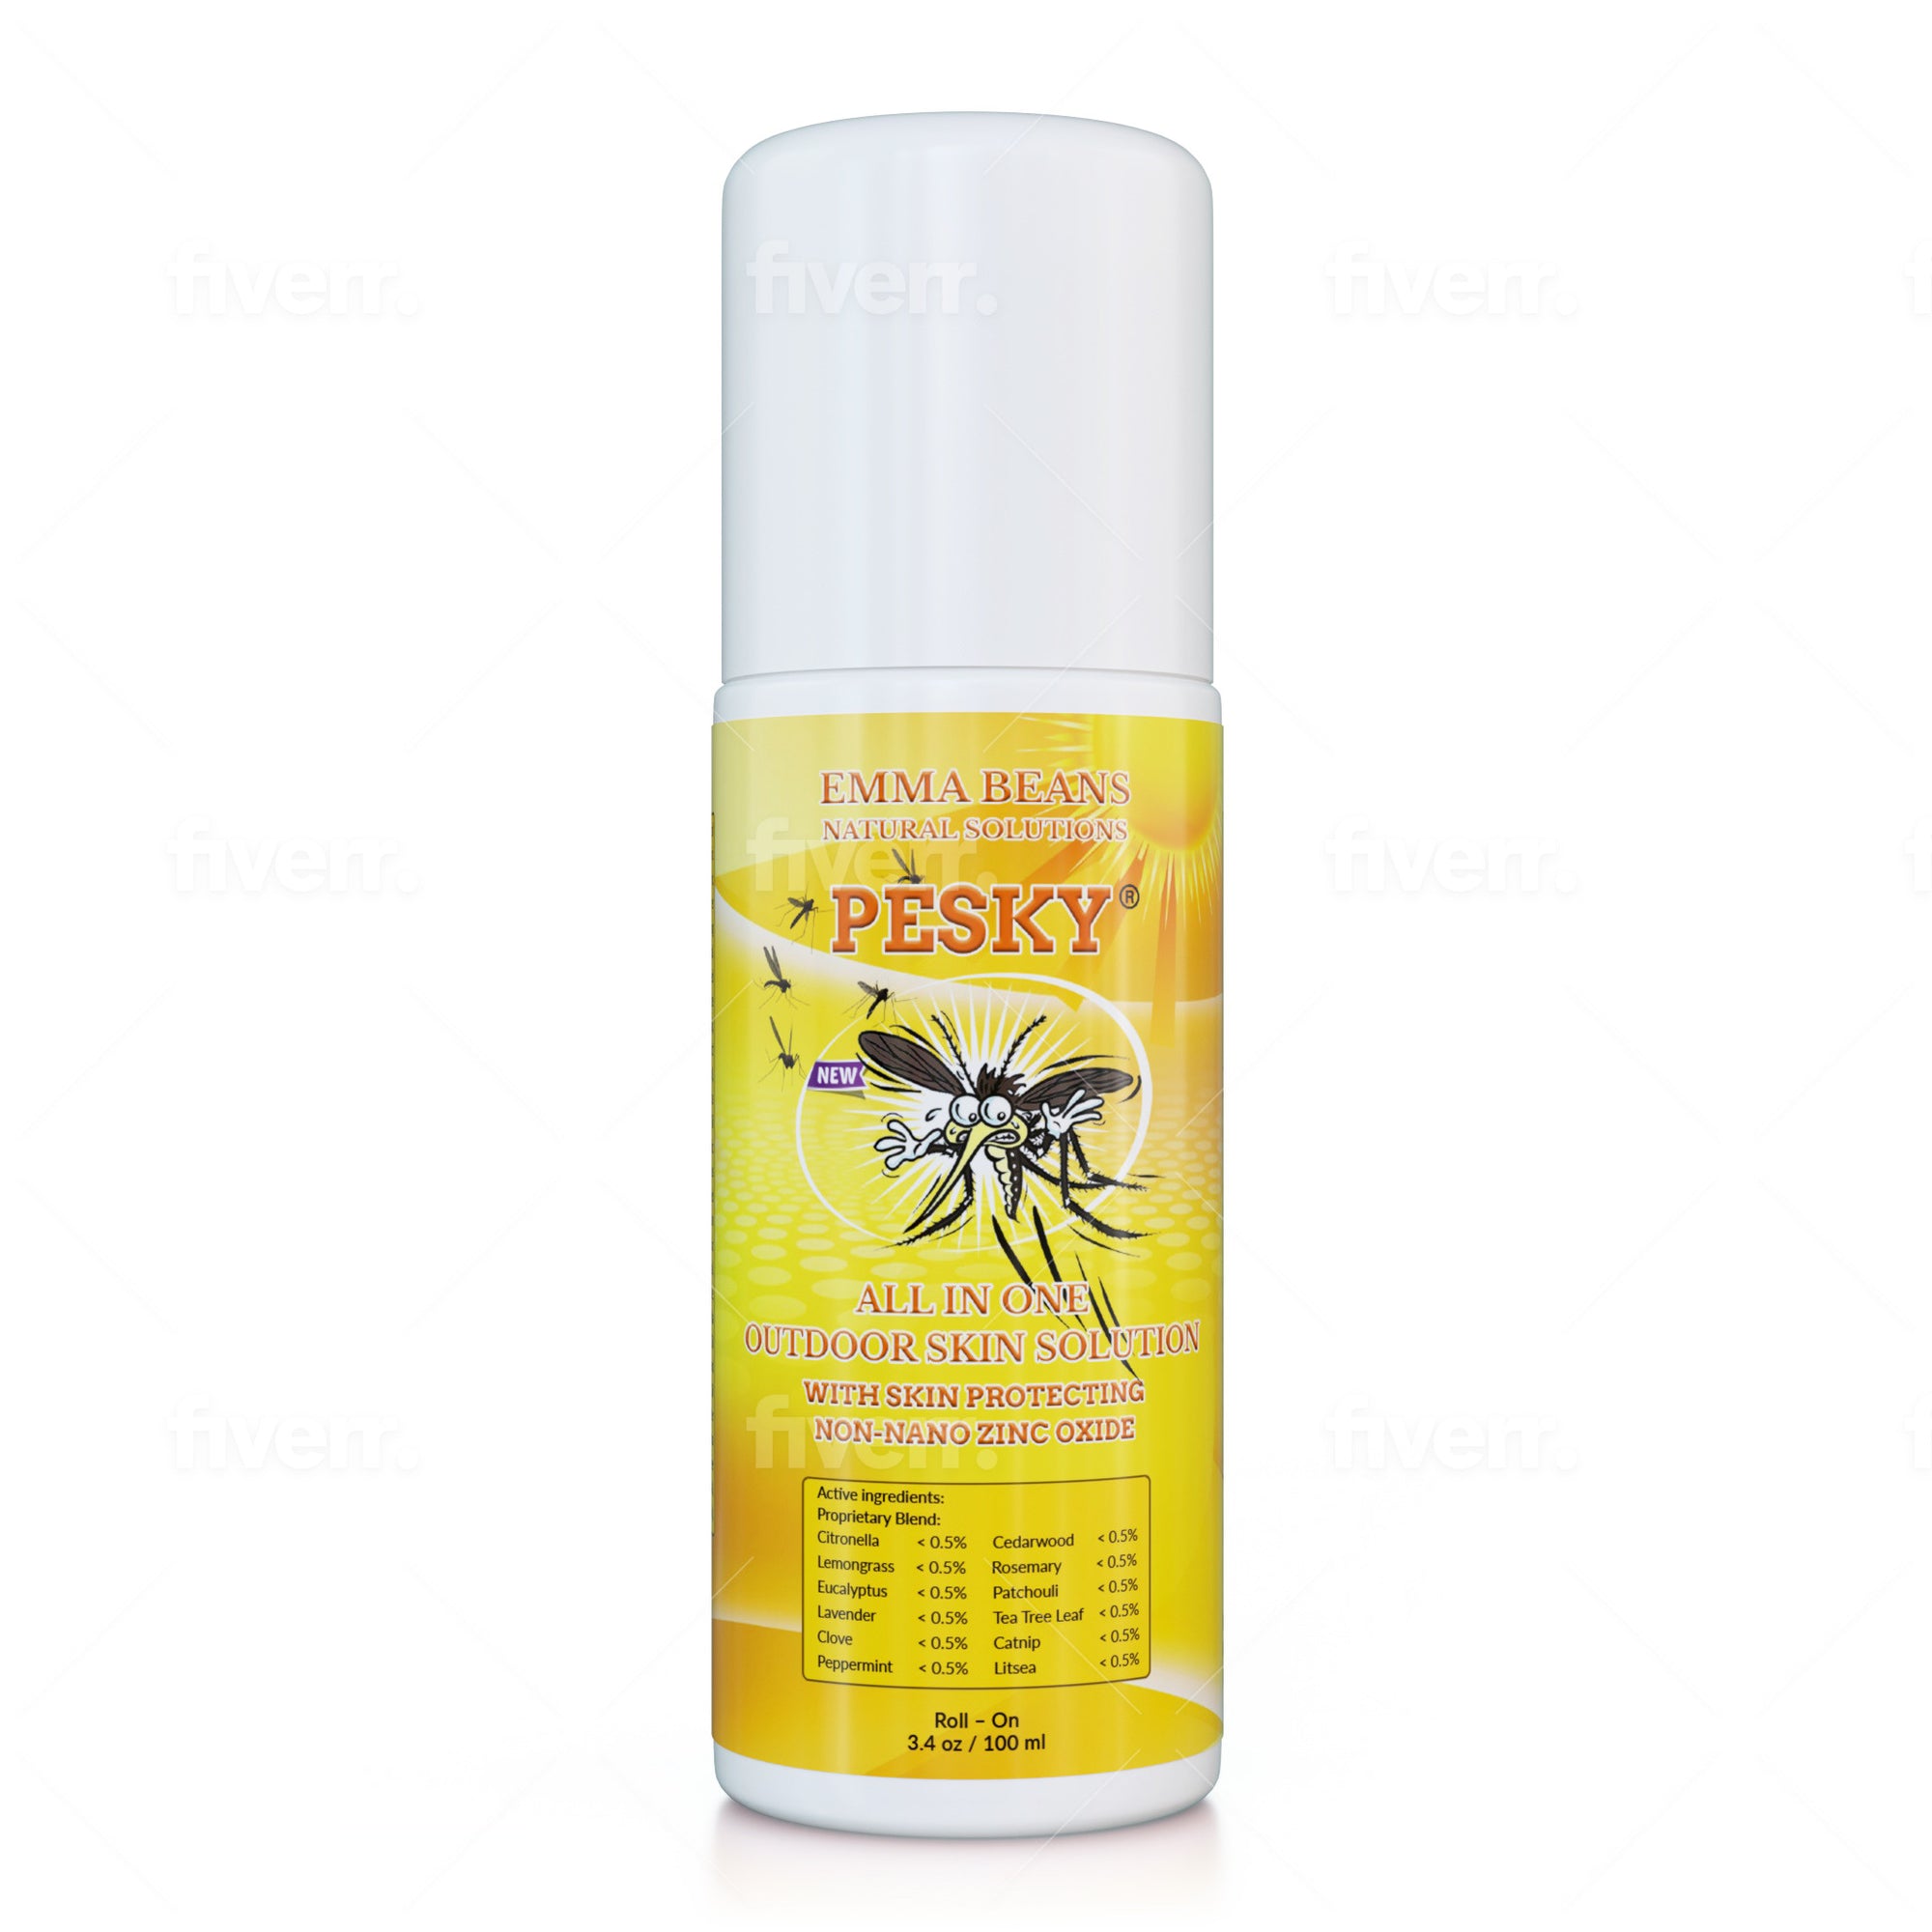 A PESKY®BUG AWAY - ALL IN ONE OUTDOOR SKIN SOLUTION WITH NON-NANO ZINC OXIDE